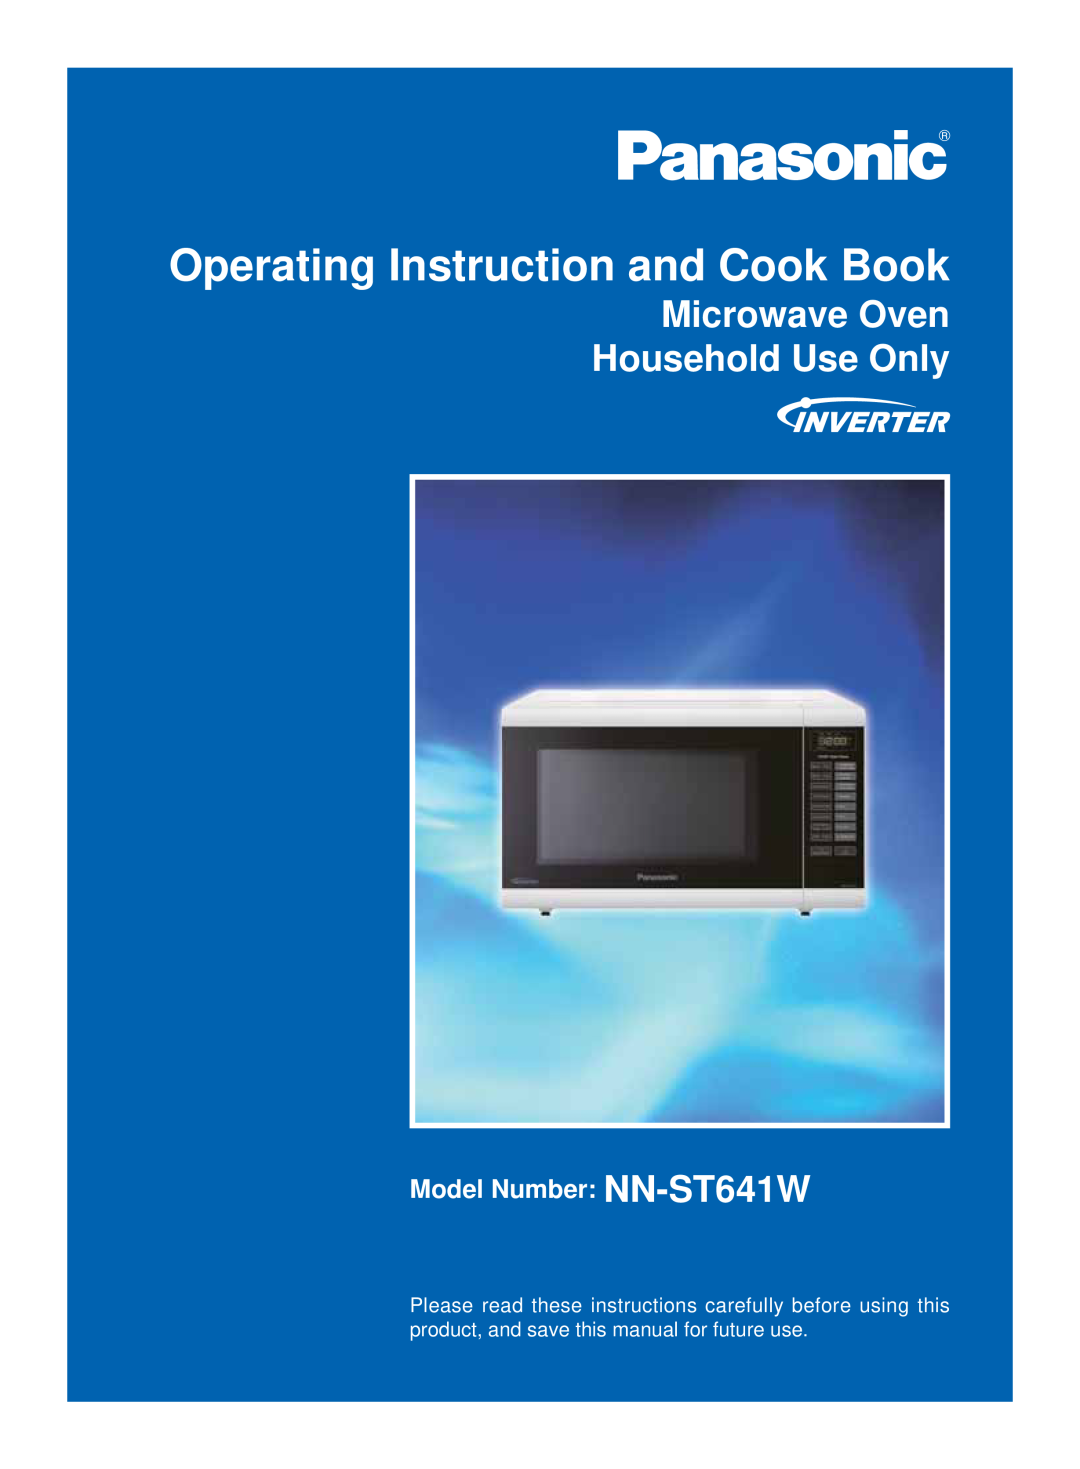 Panasonic manual Operating Instruction and Cook Book, Microwave Oven Household Use Only, Model Number NN-ST641W 